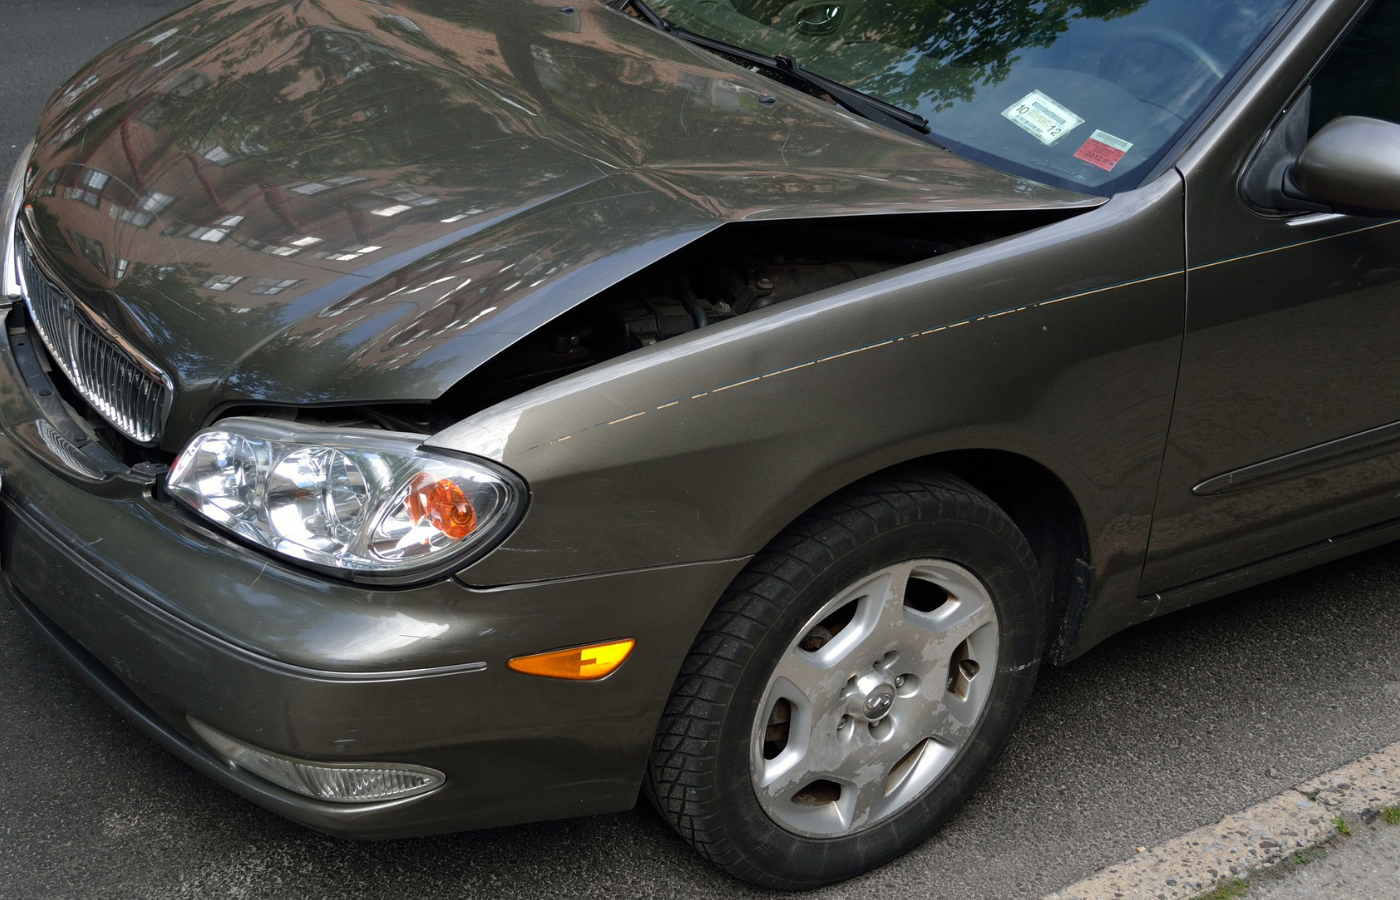 Image of a crashed car showing damage and dents with the hood bent in half in need of quality collision repair.